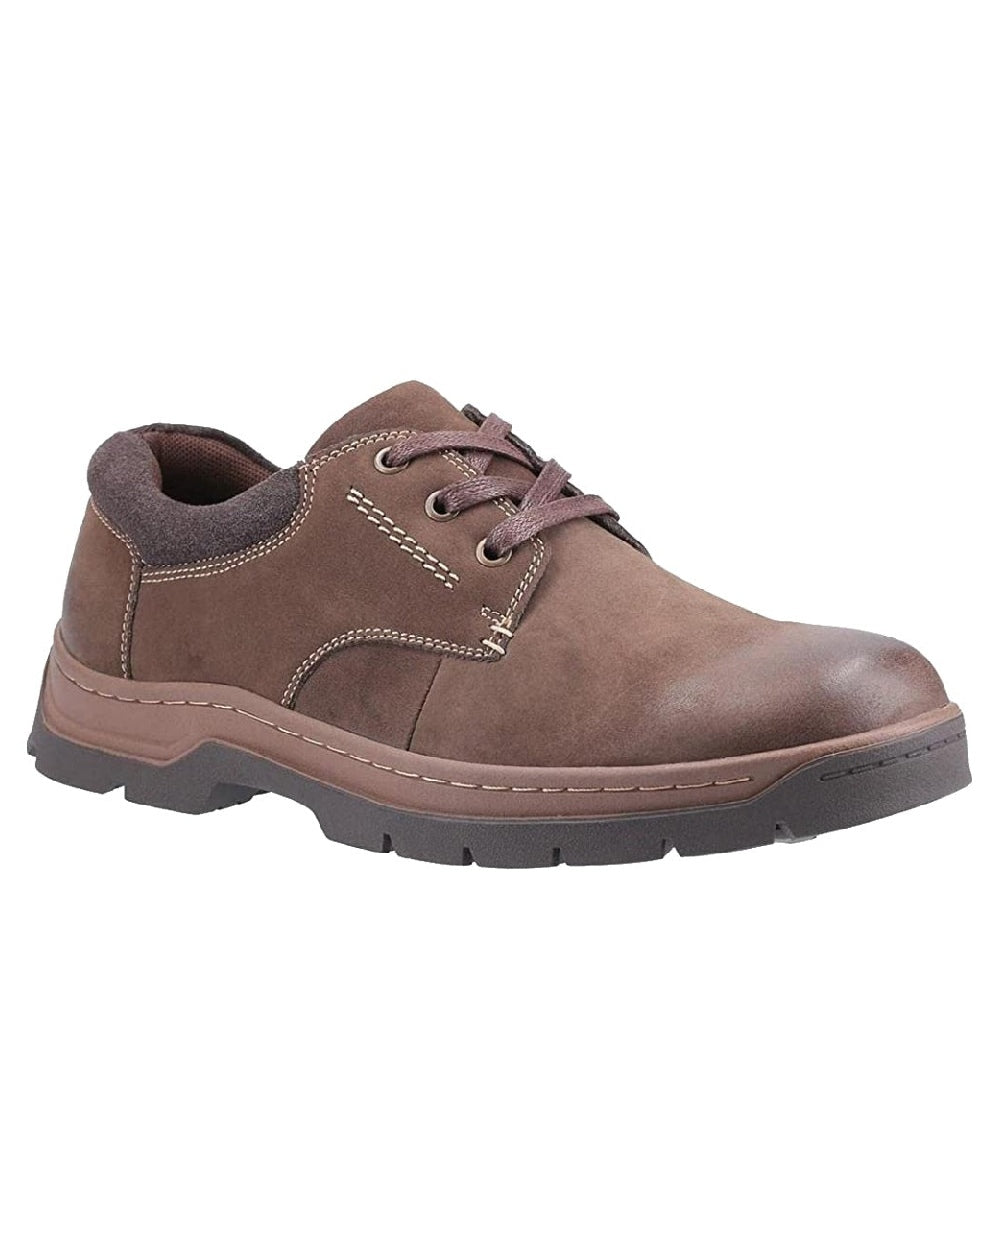 Brown coloured Cotswold Thickwood Burnished Leather Casual Shoes on white background 